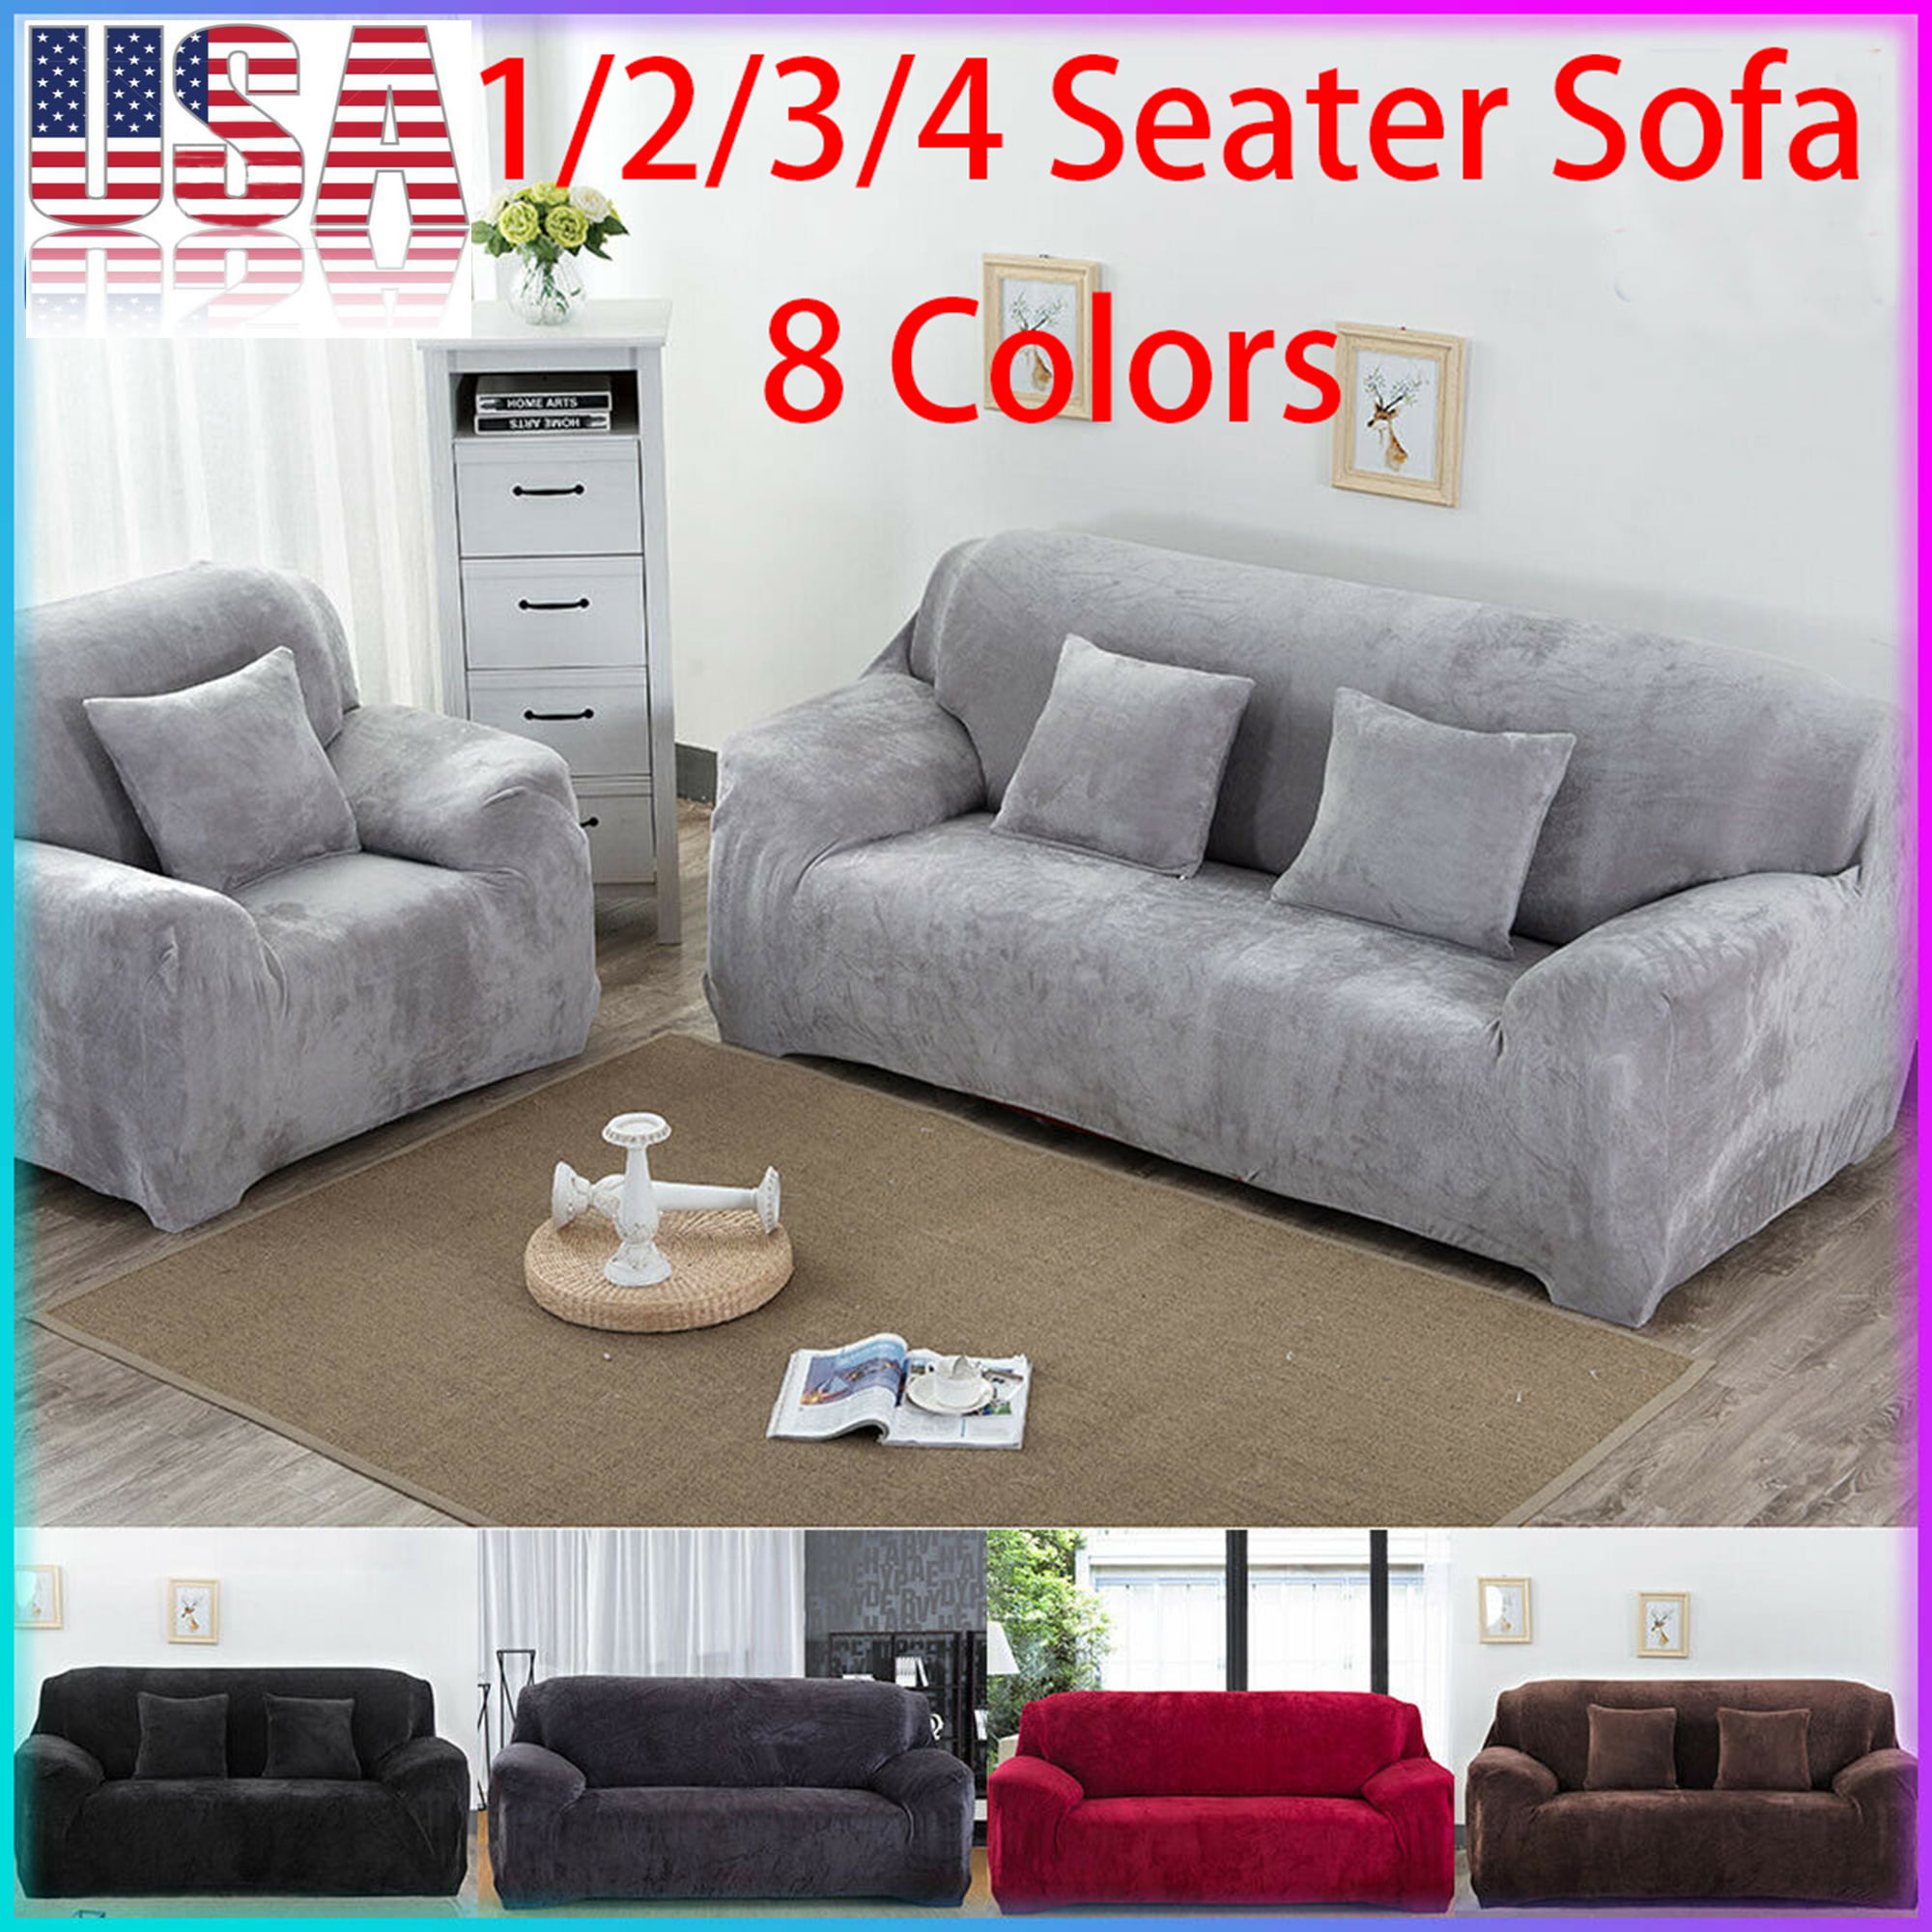 1/2/3/4 Seater Velvet Sofa Covers Slipcover Protector Couch Home Stretch Settee 